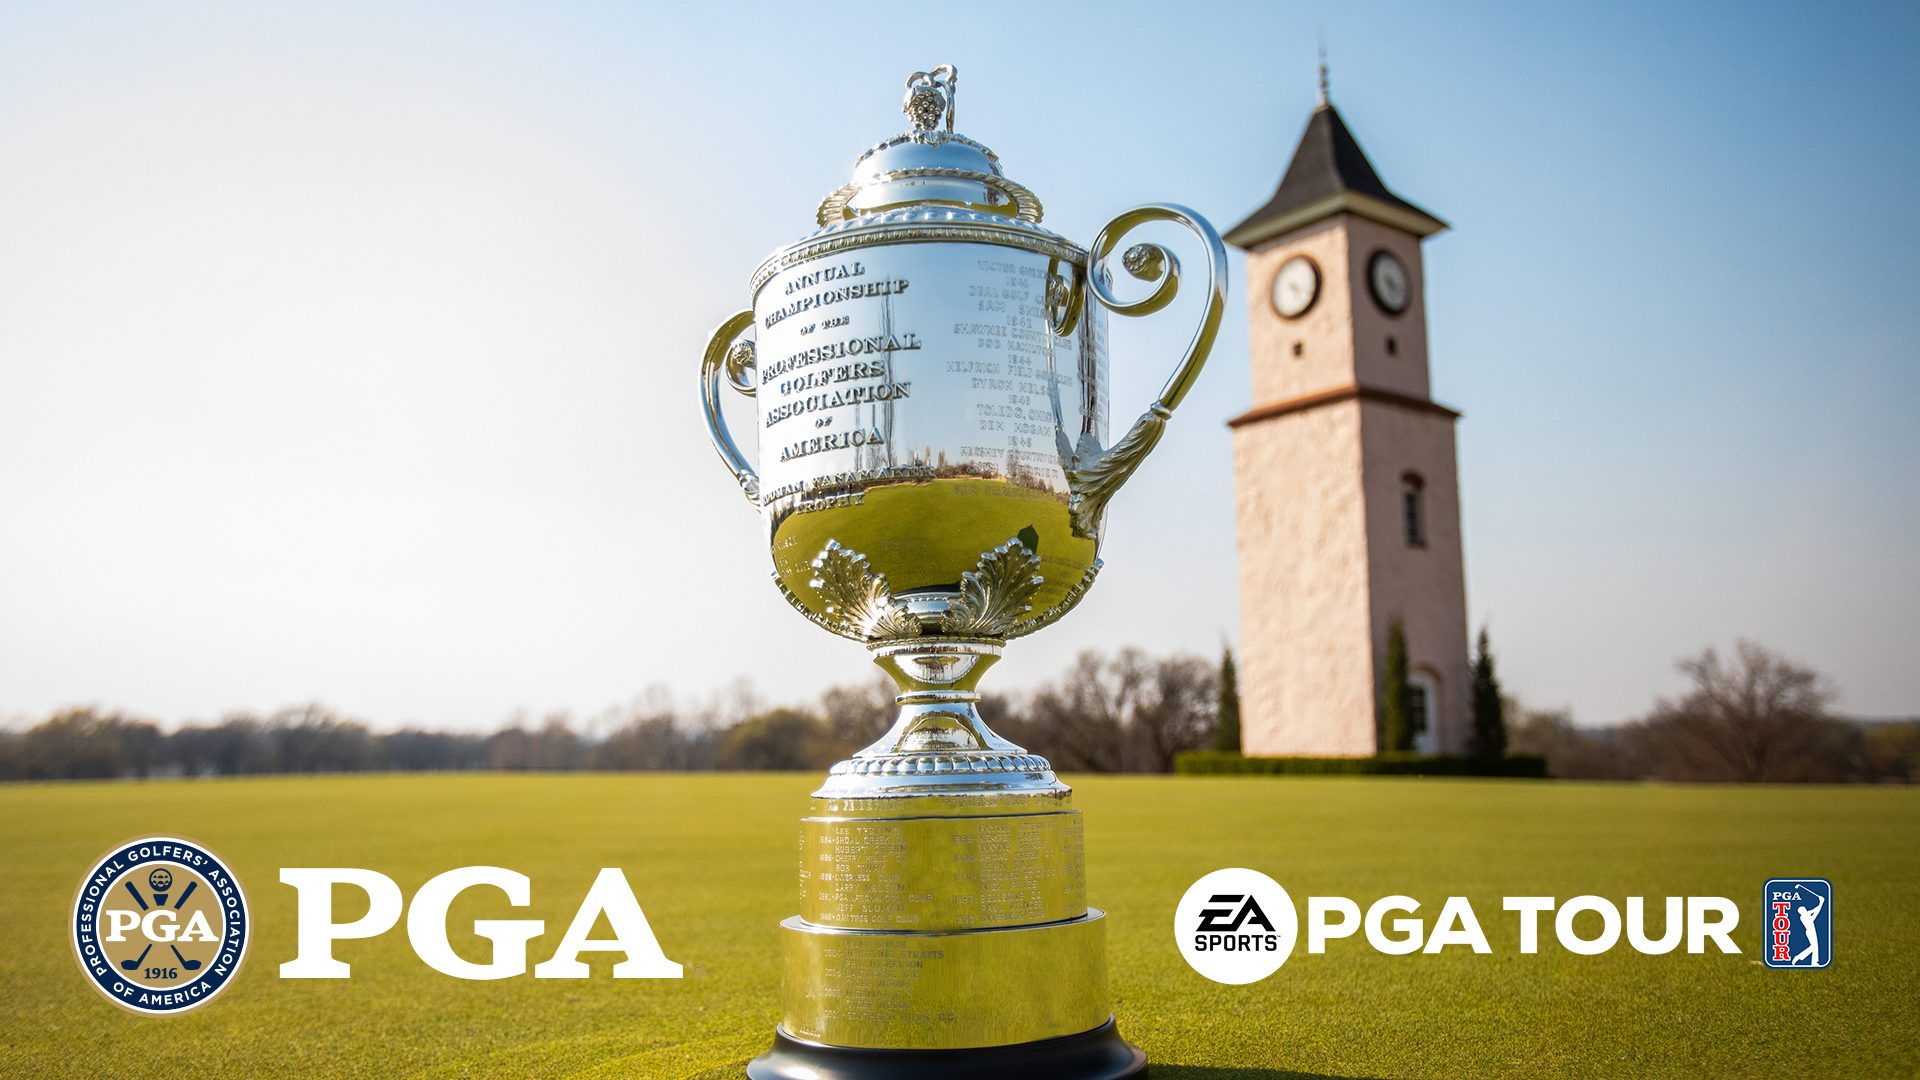 ELECTRONIC ARTS AND THE PGA OF AMERICA PARTNER TO BRING PGA